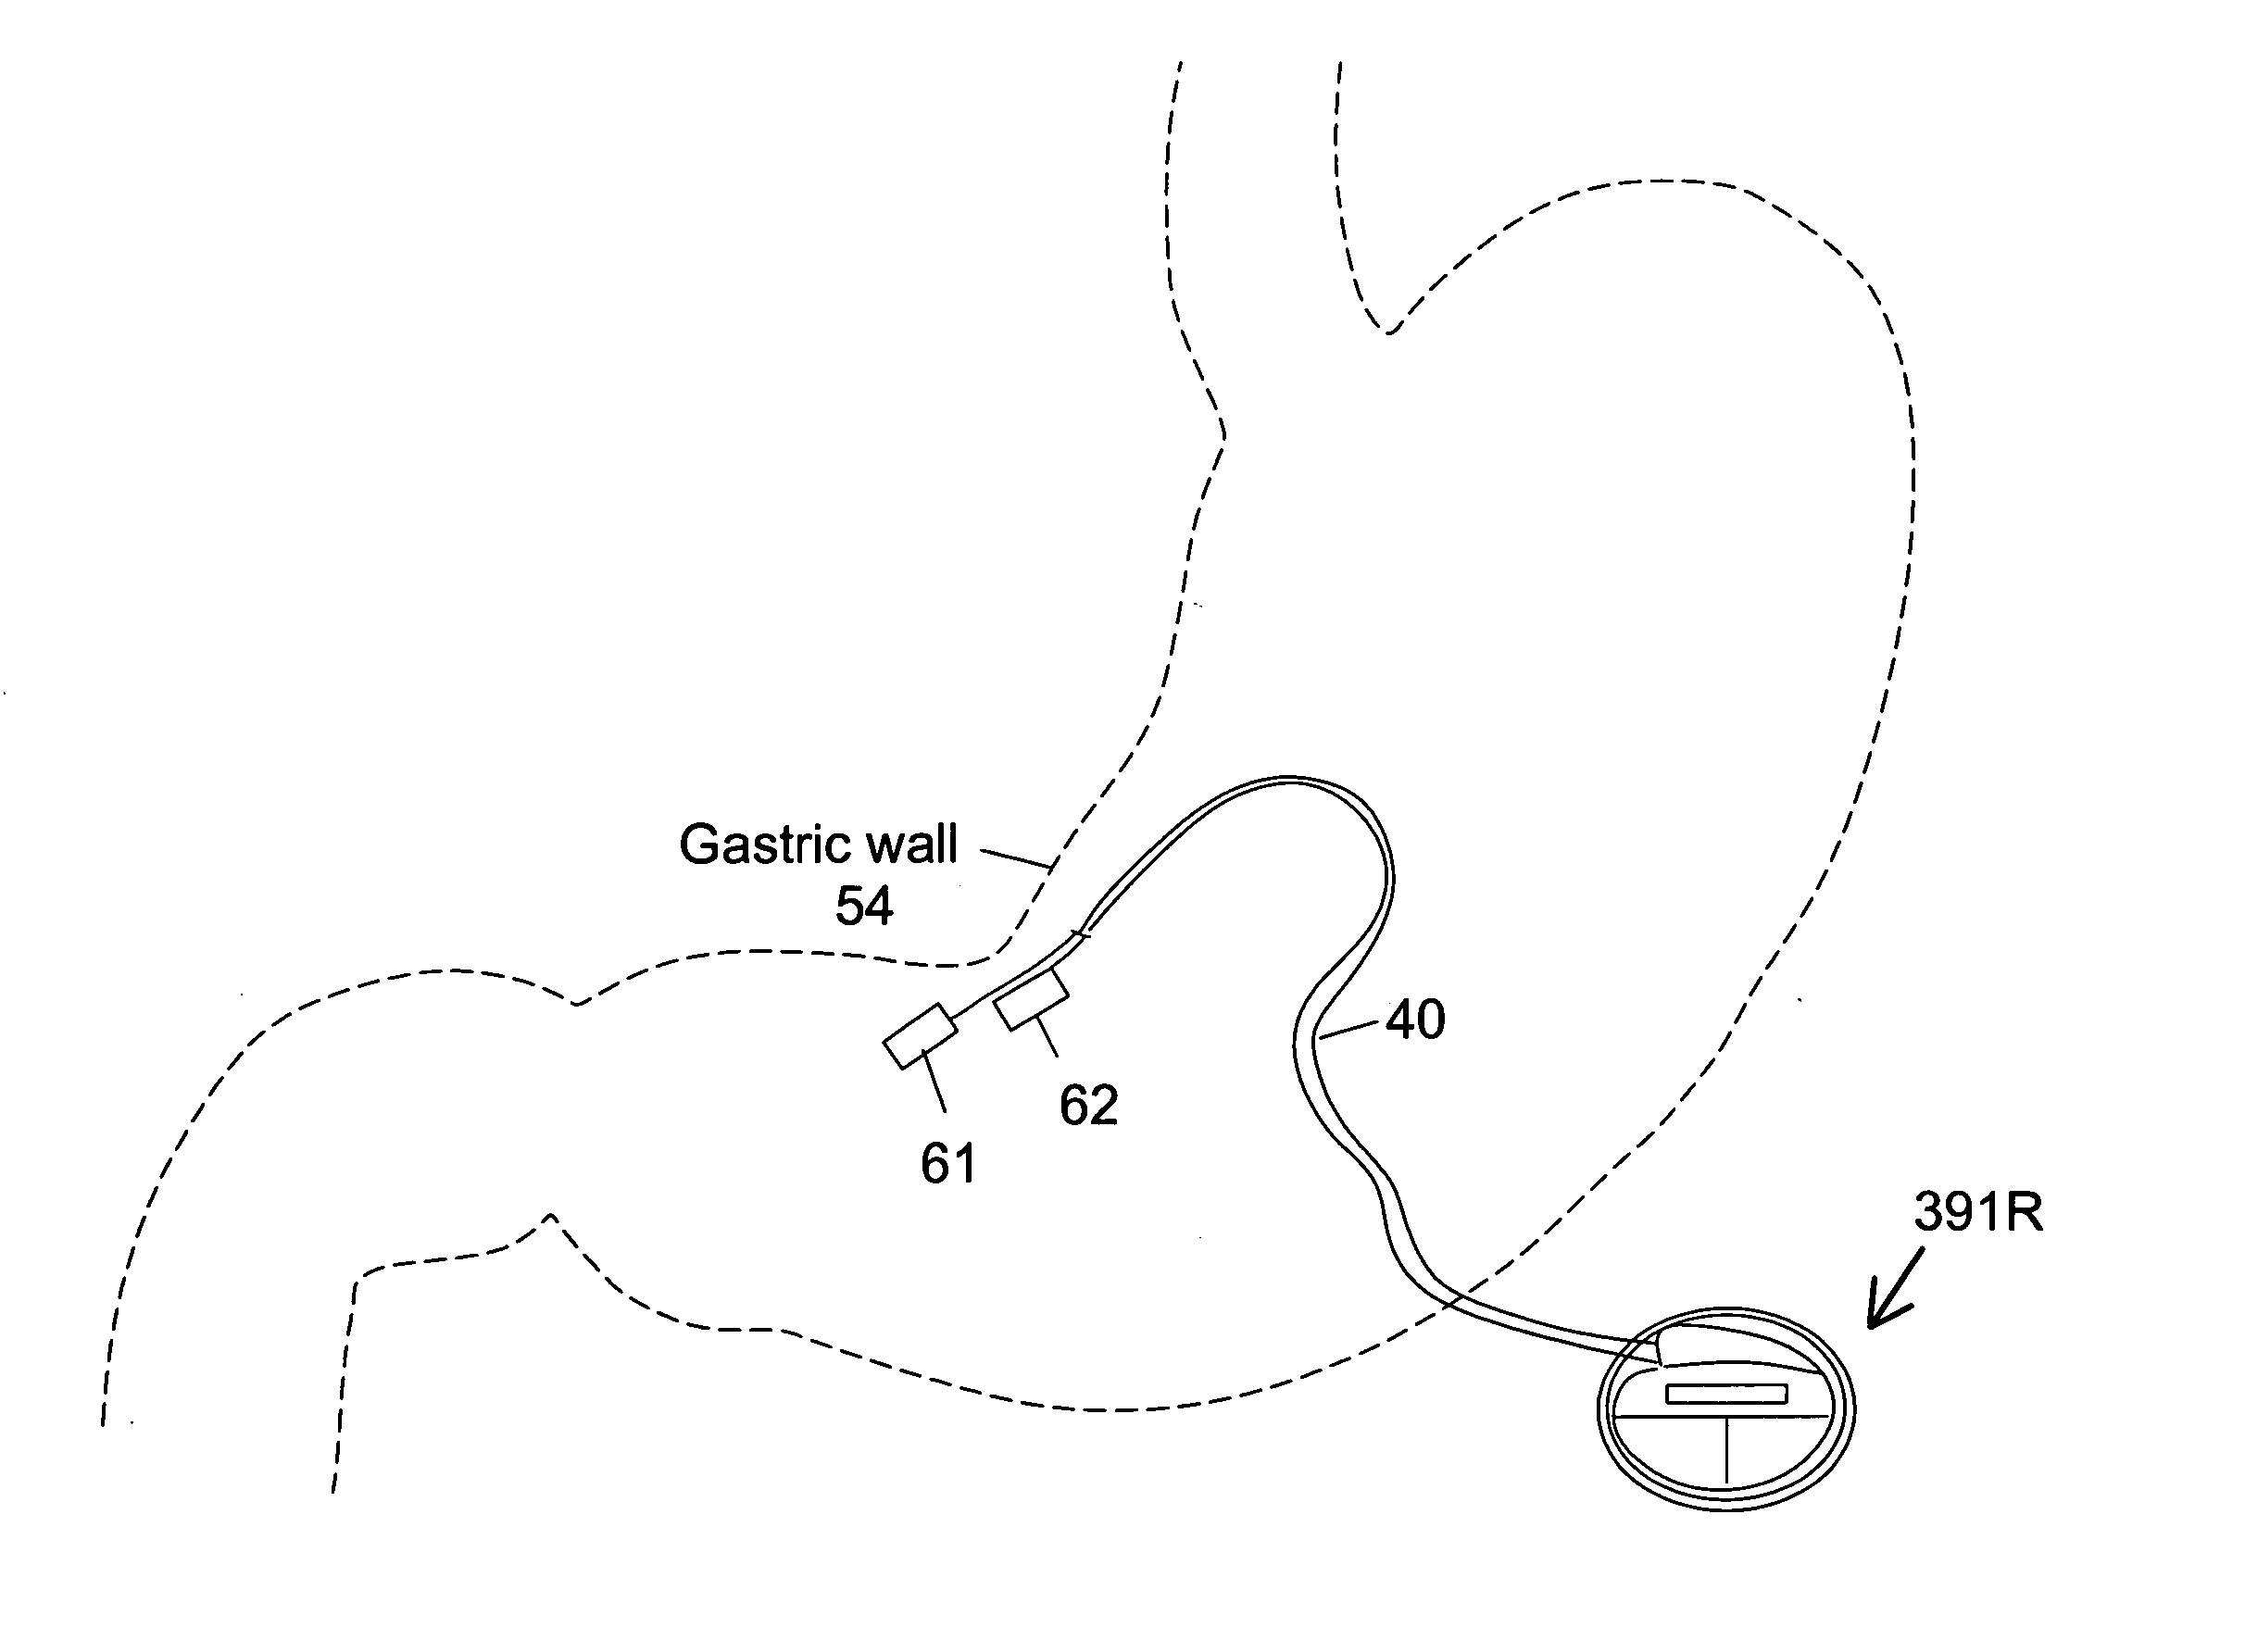 Method and system for providing electrical pulses to gastric wall of a patient with rechargeable implantable pulse generator for treating or controlling obesity and eating disorders